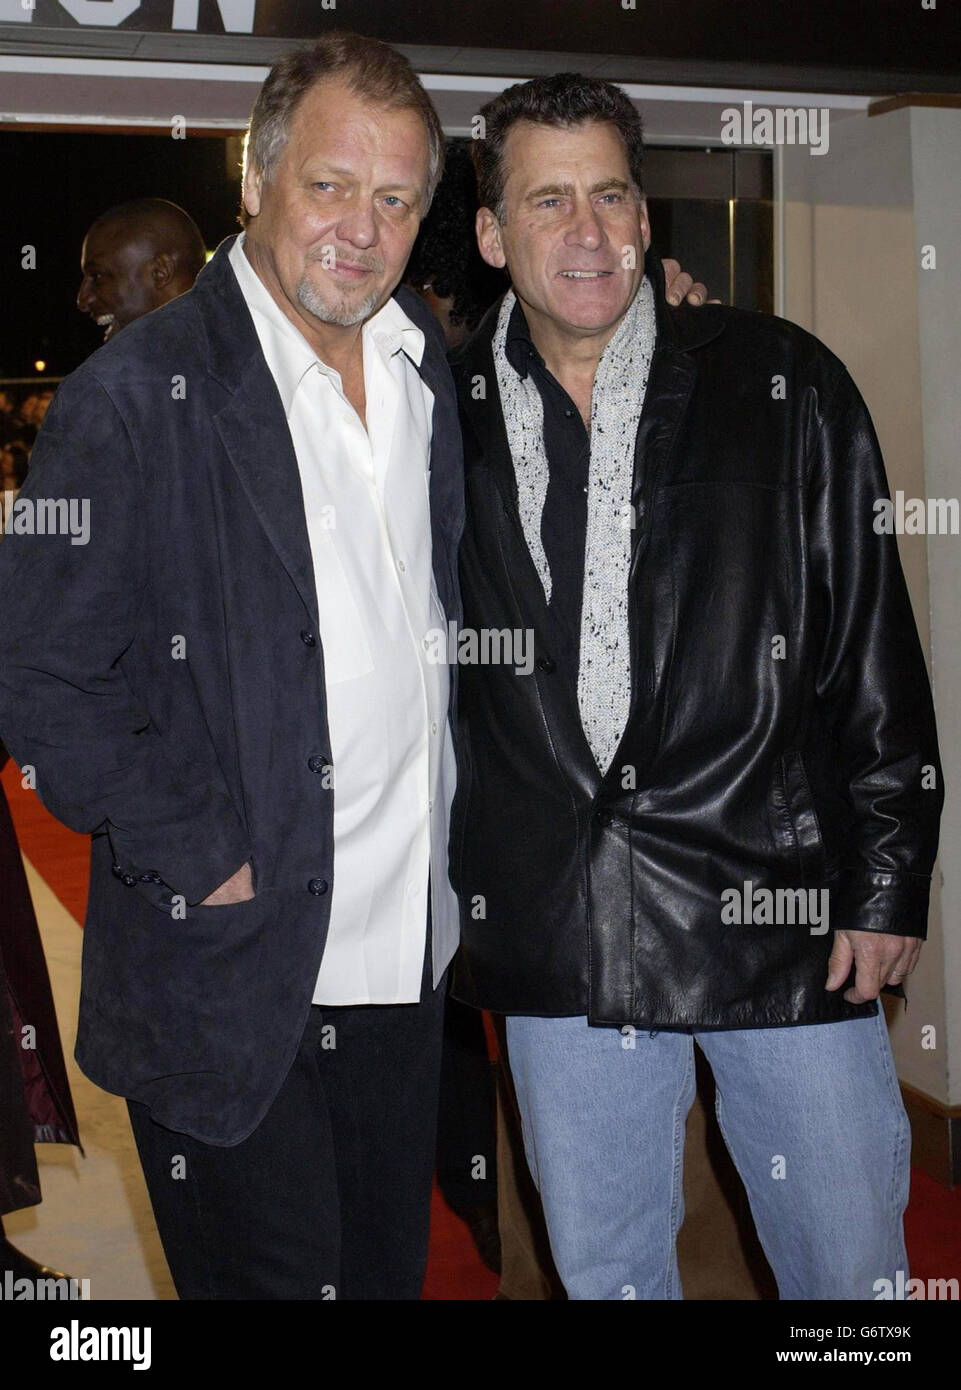 Stars of the TV series David Soul (left) and Paul Michael Glaser arrive for the UK premiere of Starsky & Hutch at the Odeon Cinema in Leicester Square, central London. Stock Photo